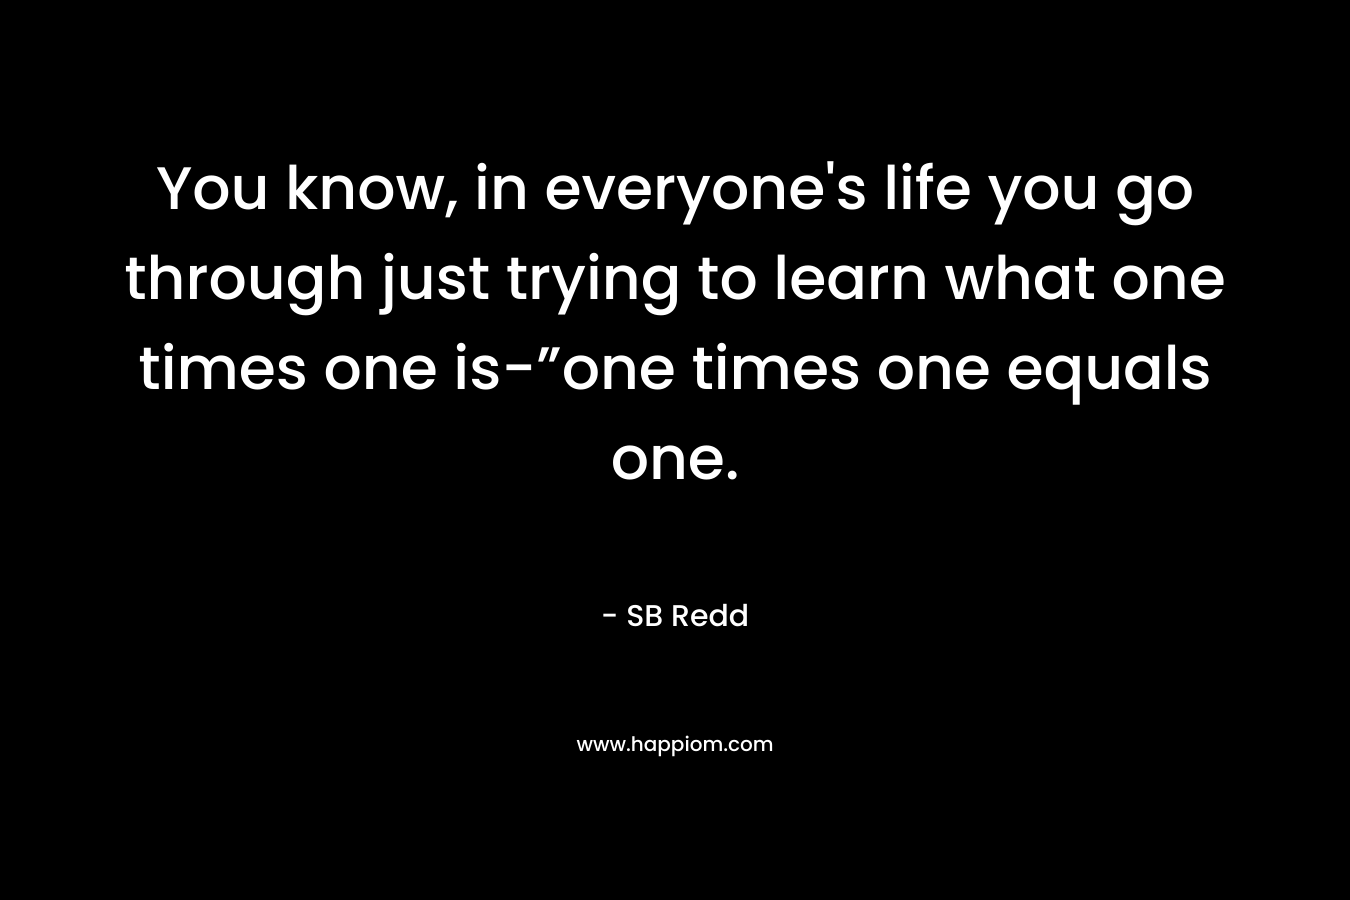 You know, in everyone’s life you go through just trying to learn what one times one is-”one times one equals one. – SB Redd